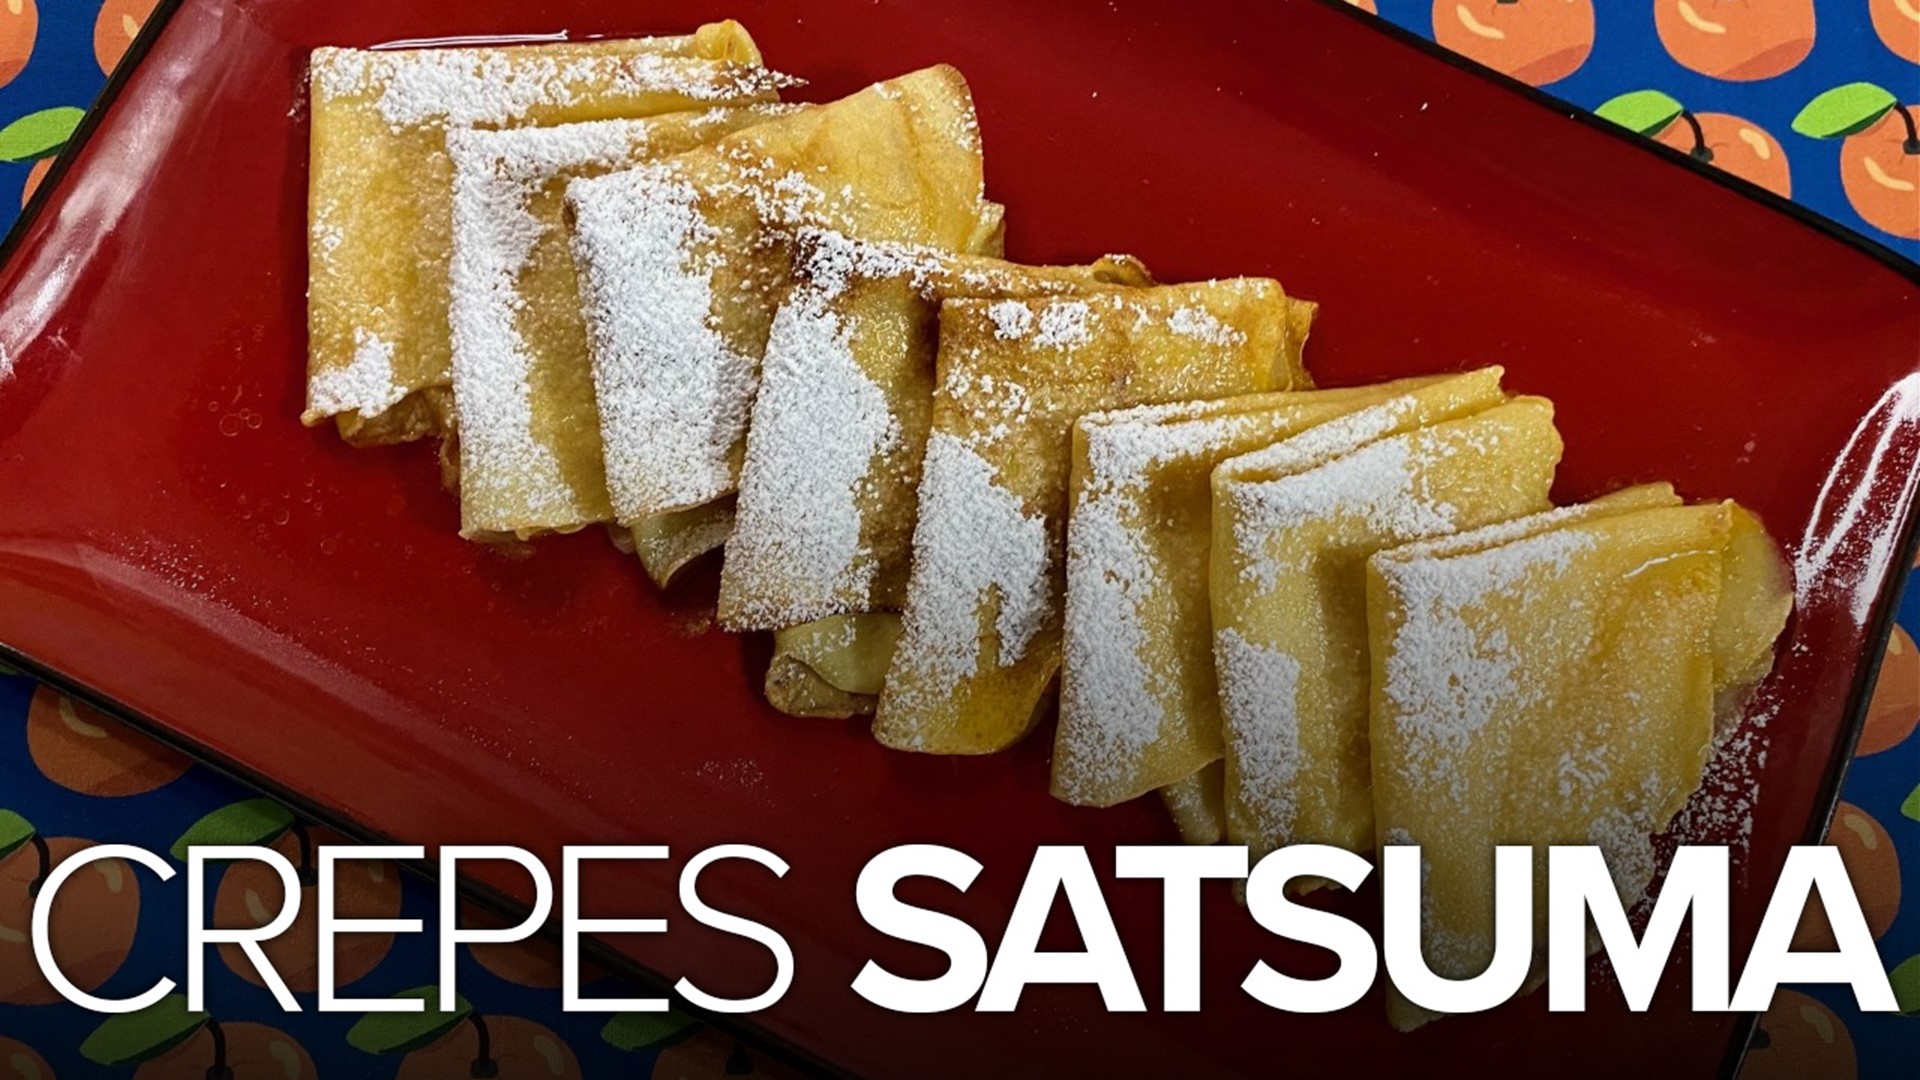 You'll love Chef Kevin's spin on the classic Crepes Suzette.